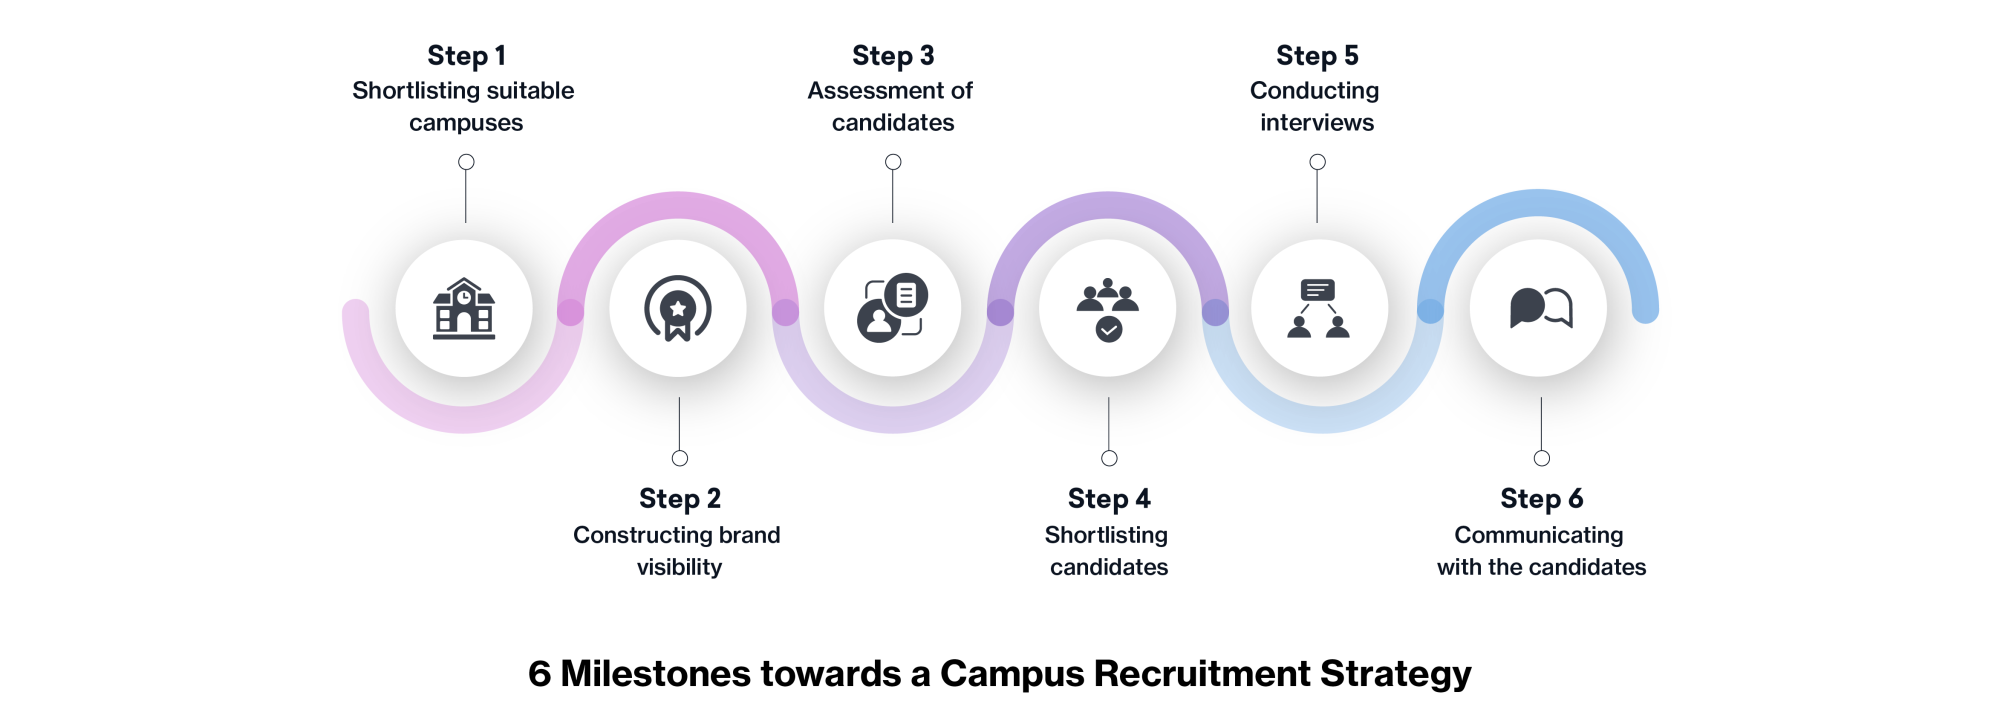 Sourcing candidates from college campuses can be an essential part of a targeted recruitment strategy for large businesses.